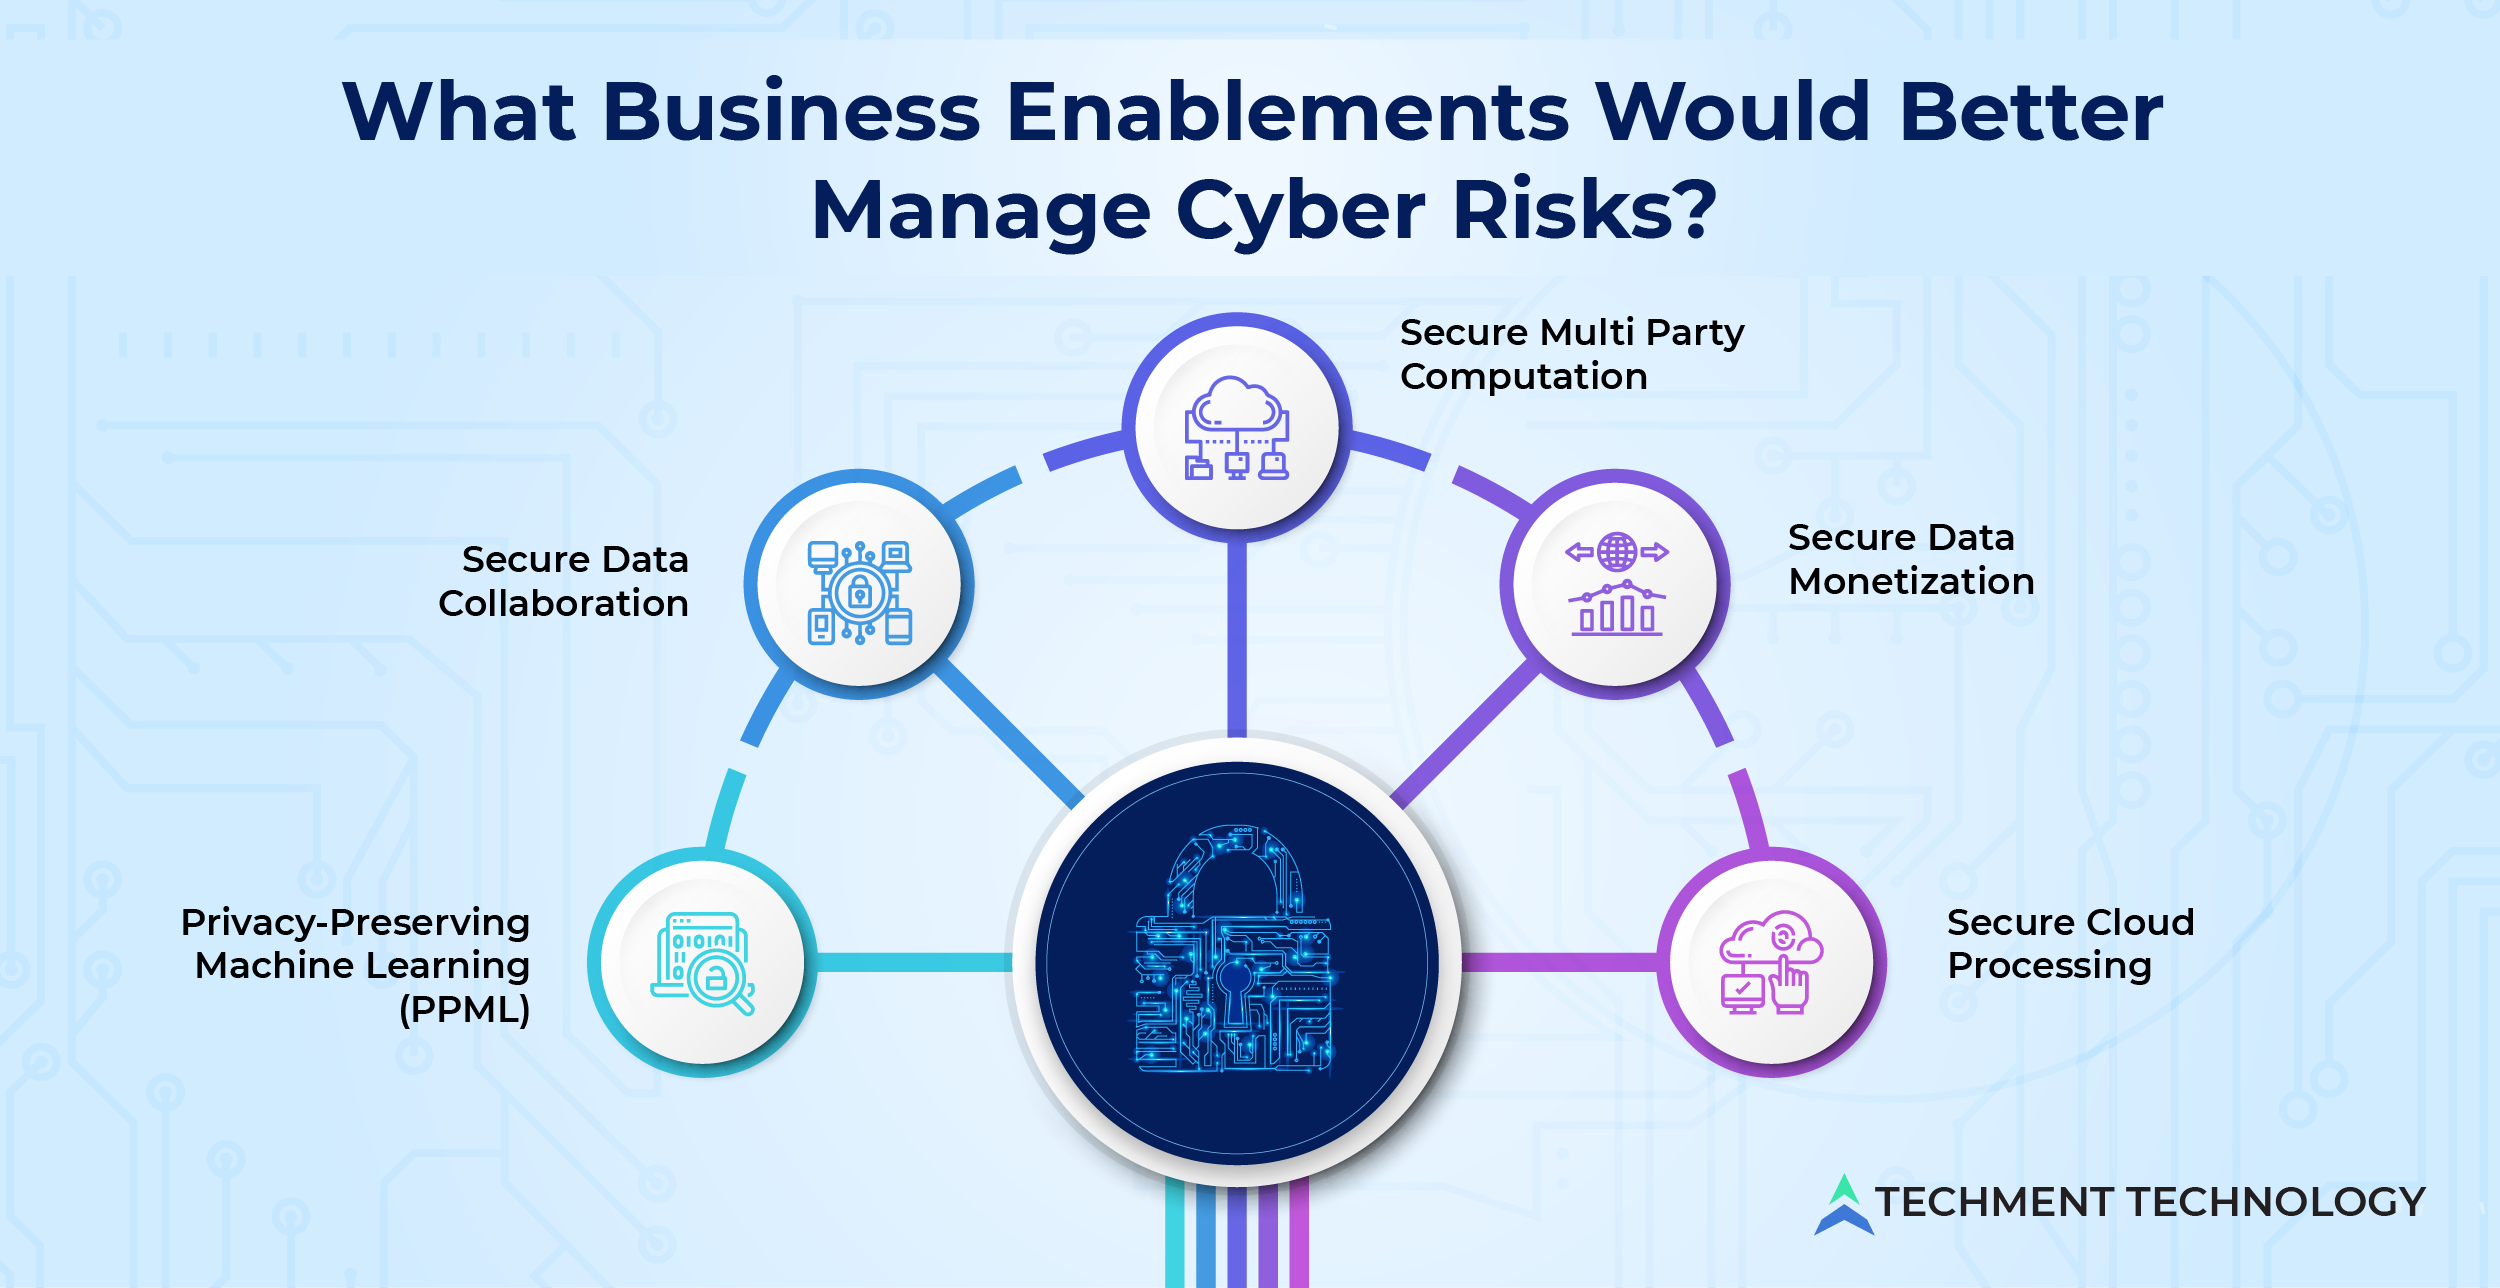   What Business Enablements Would Better Manage Cyber Risks?